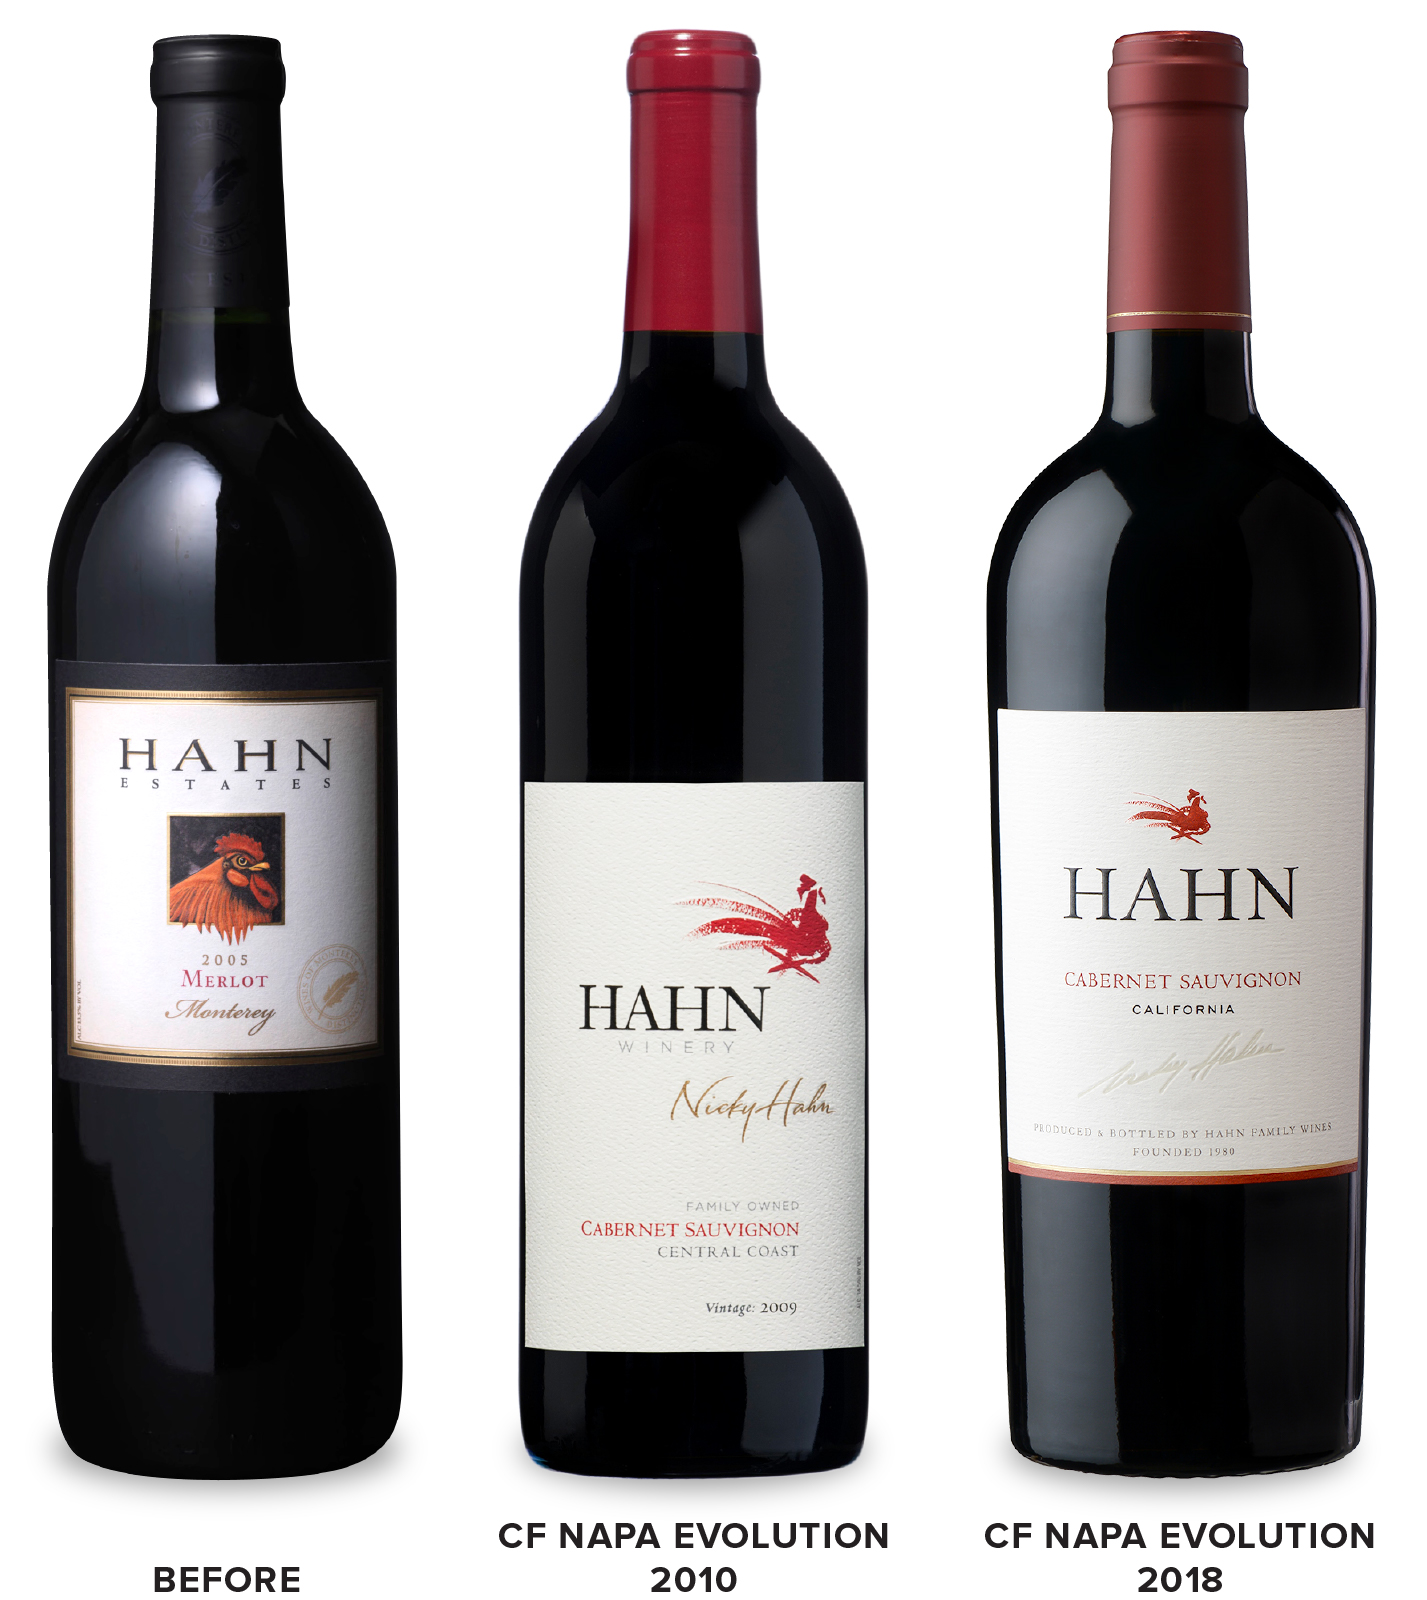 Hahn Family Wines Before Packaging Redesign on Left, 2010 Design in Middle, 2018 Design on Right